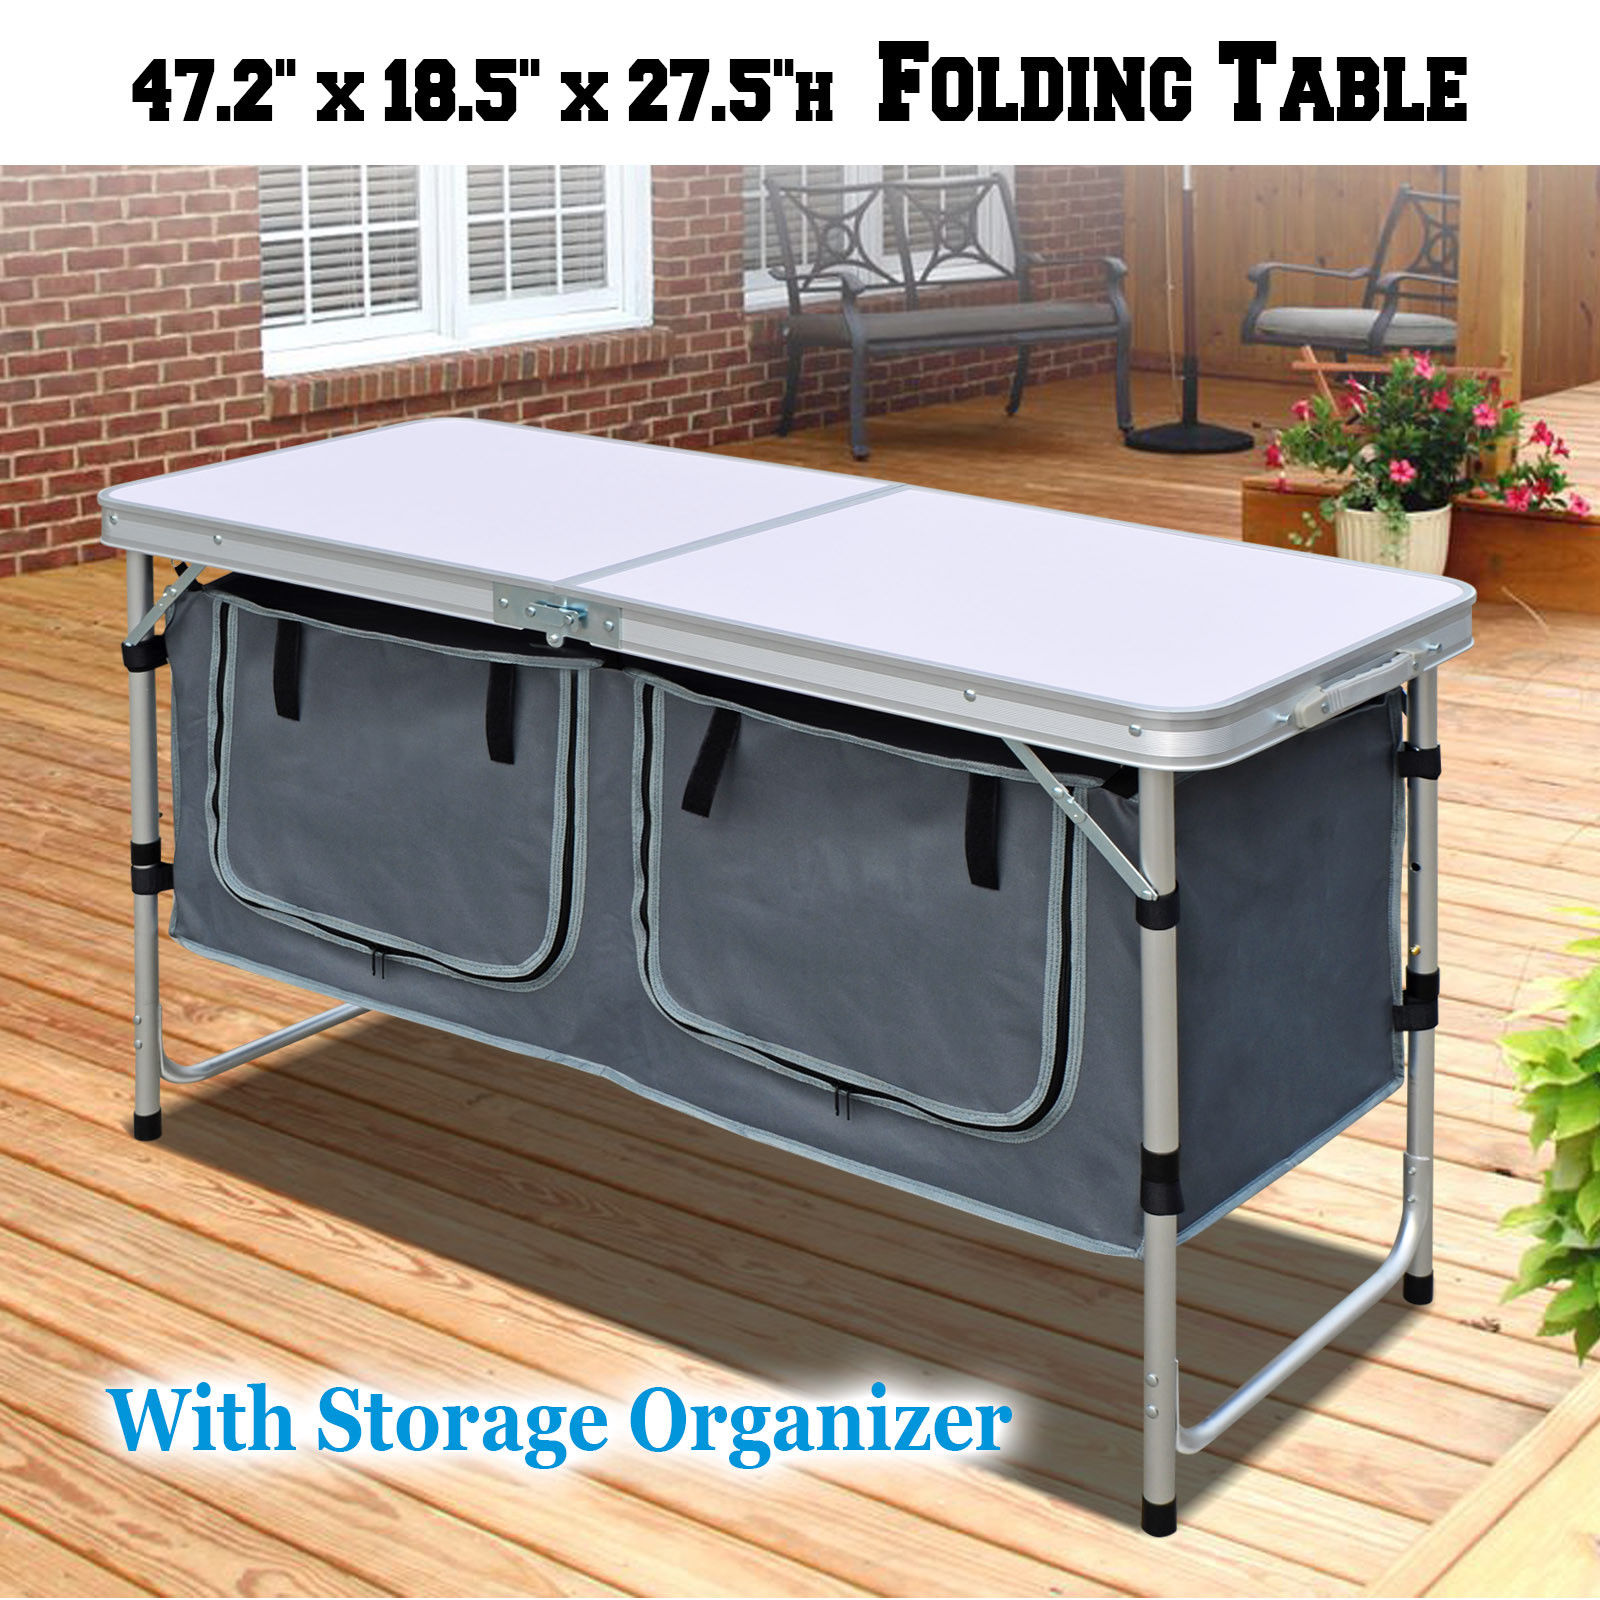 Sunrise Outdoor Folding Table 47 Inch Aluminum Lightweight Camping Picnic Table Adjustable Height with Storage Organizer - image 4 of 11